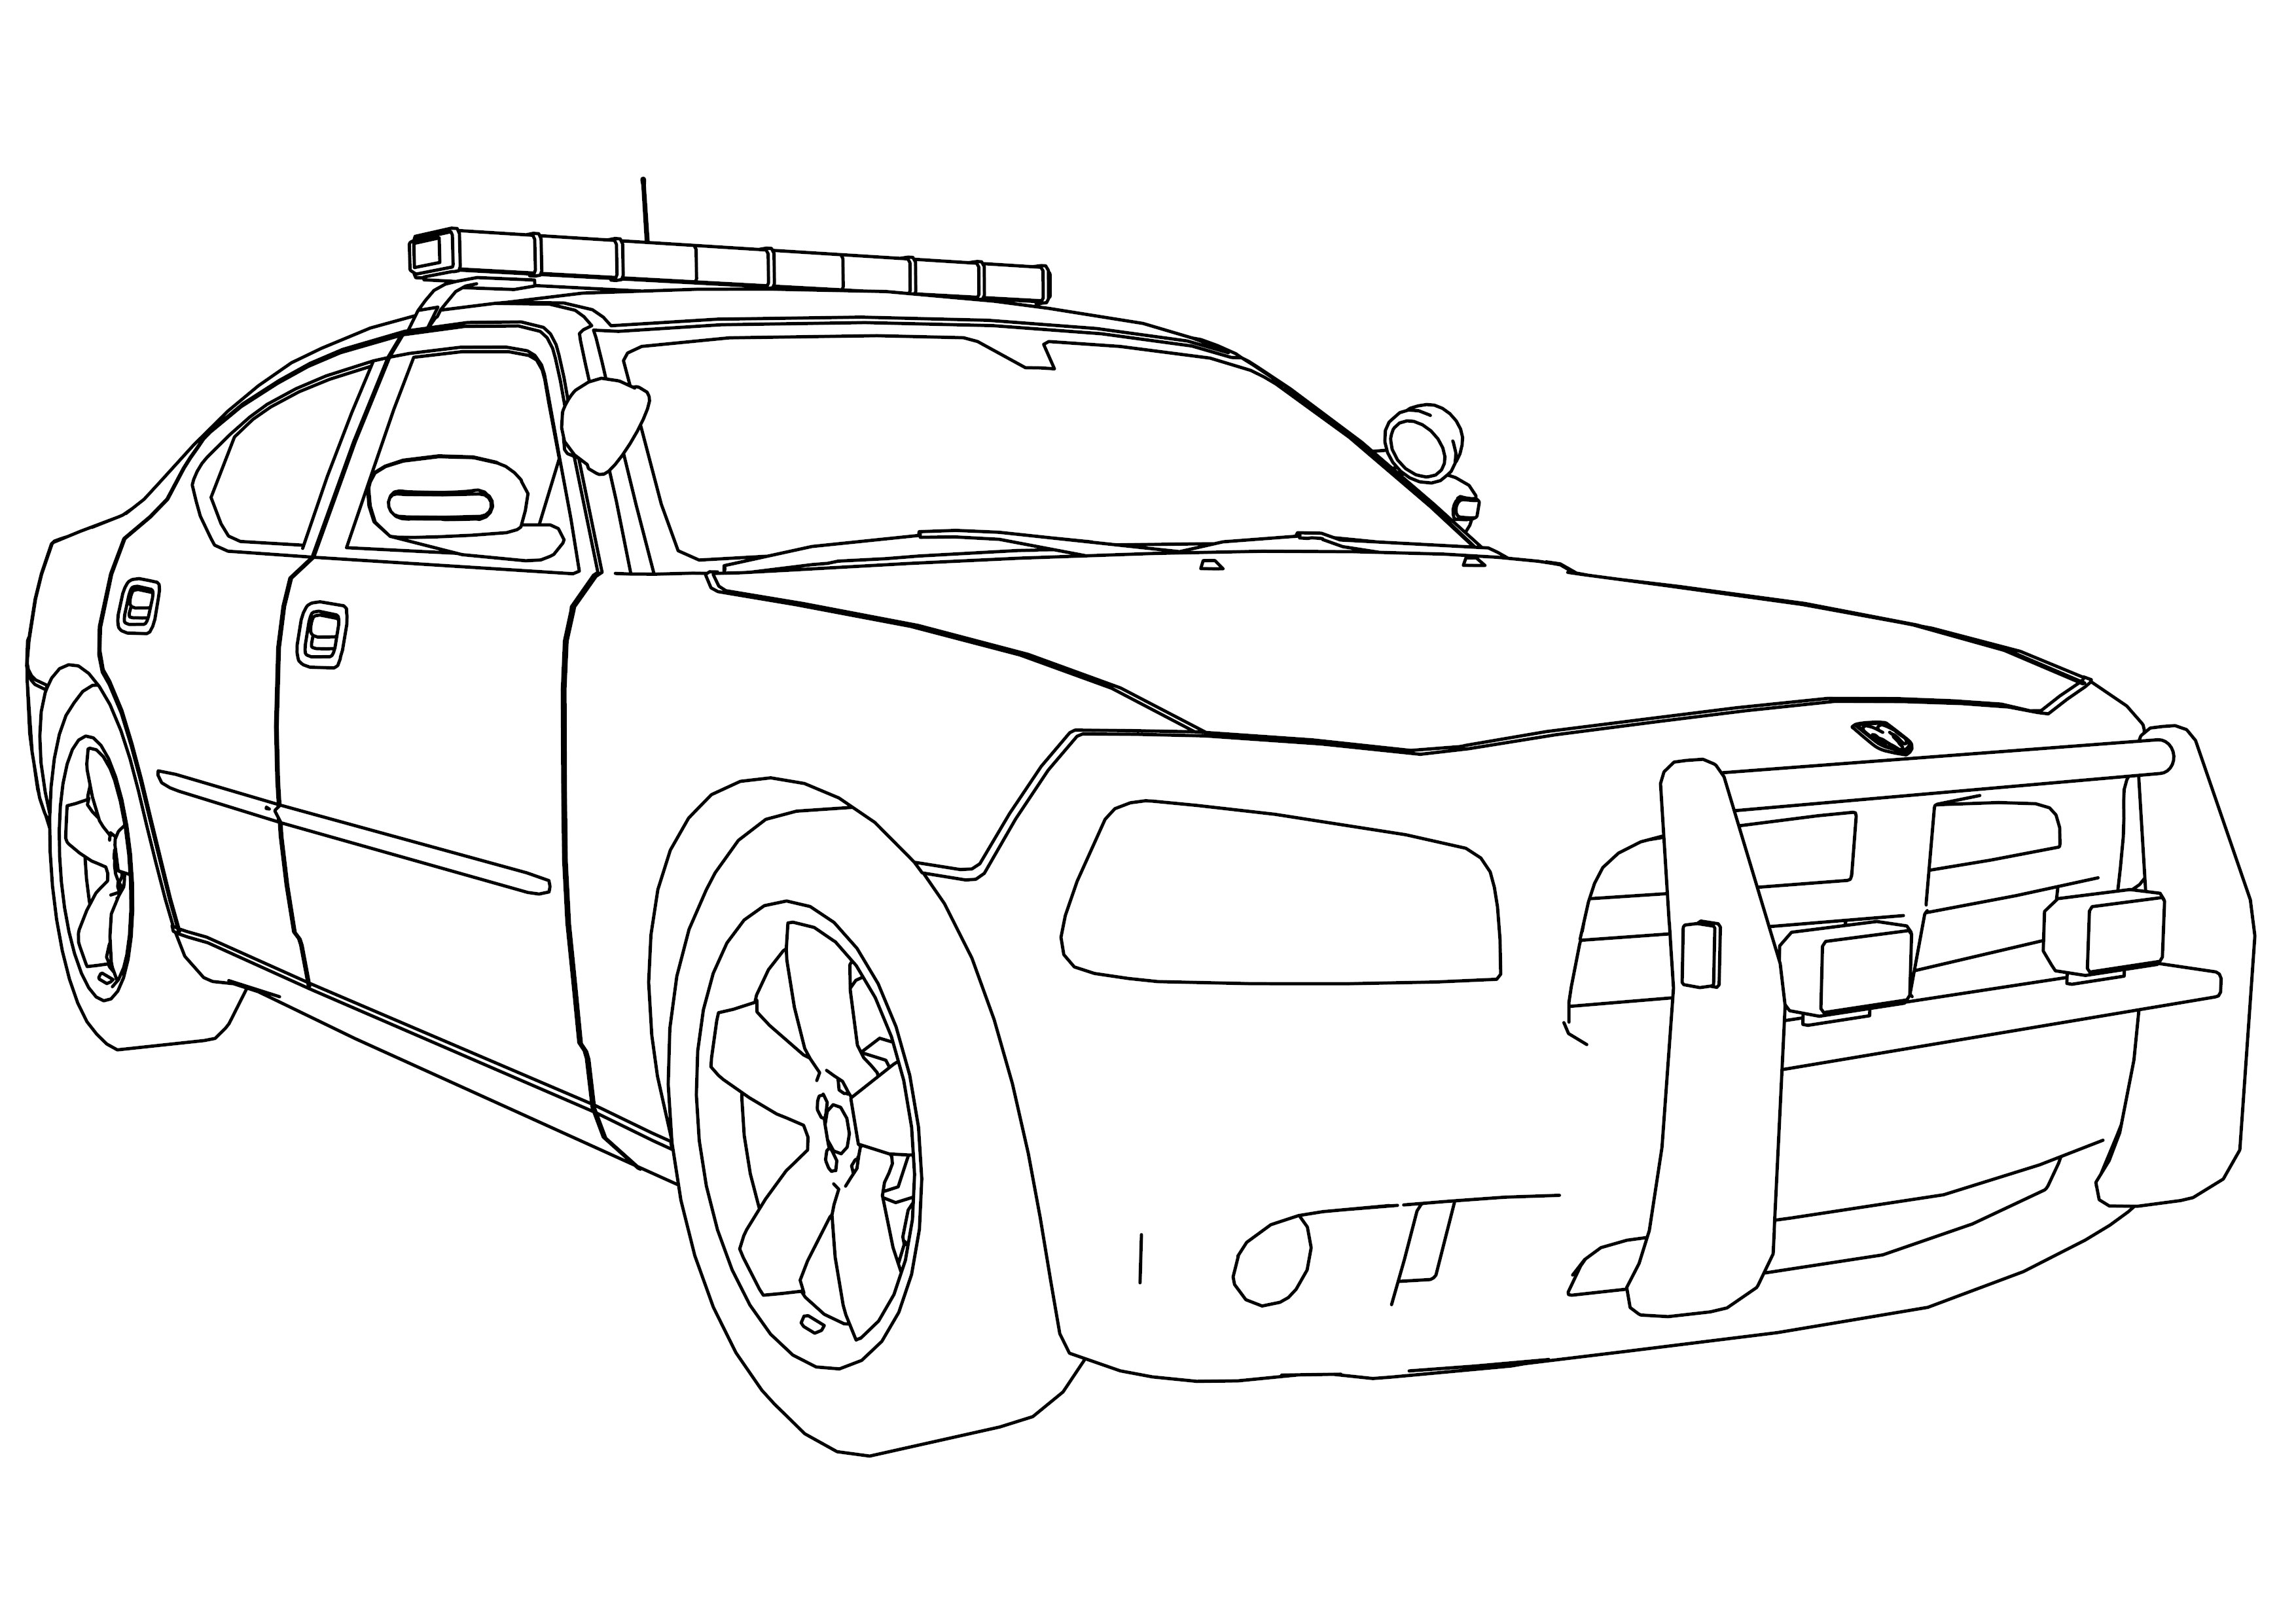 New Police Car Dodge Charger Coloring Page. 